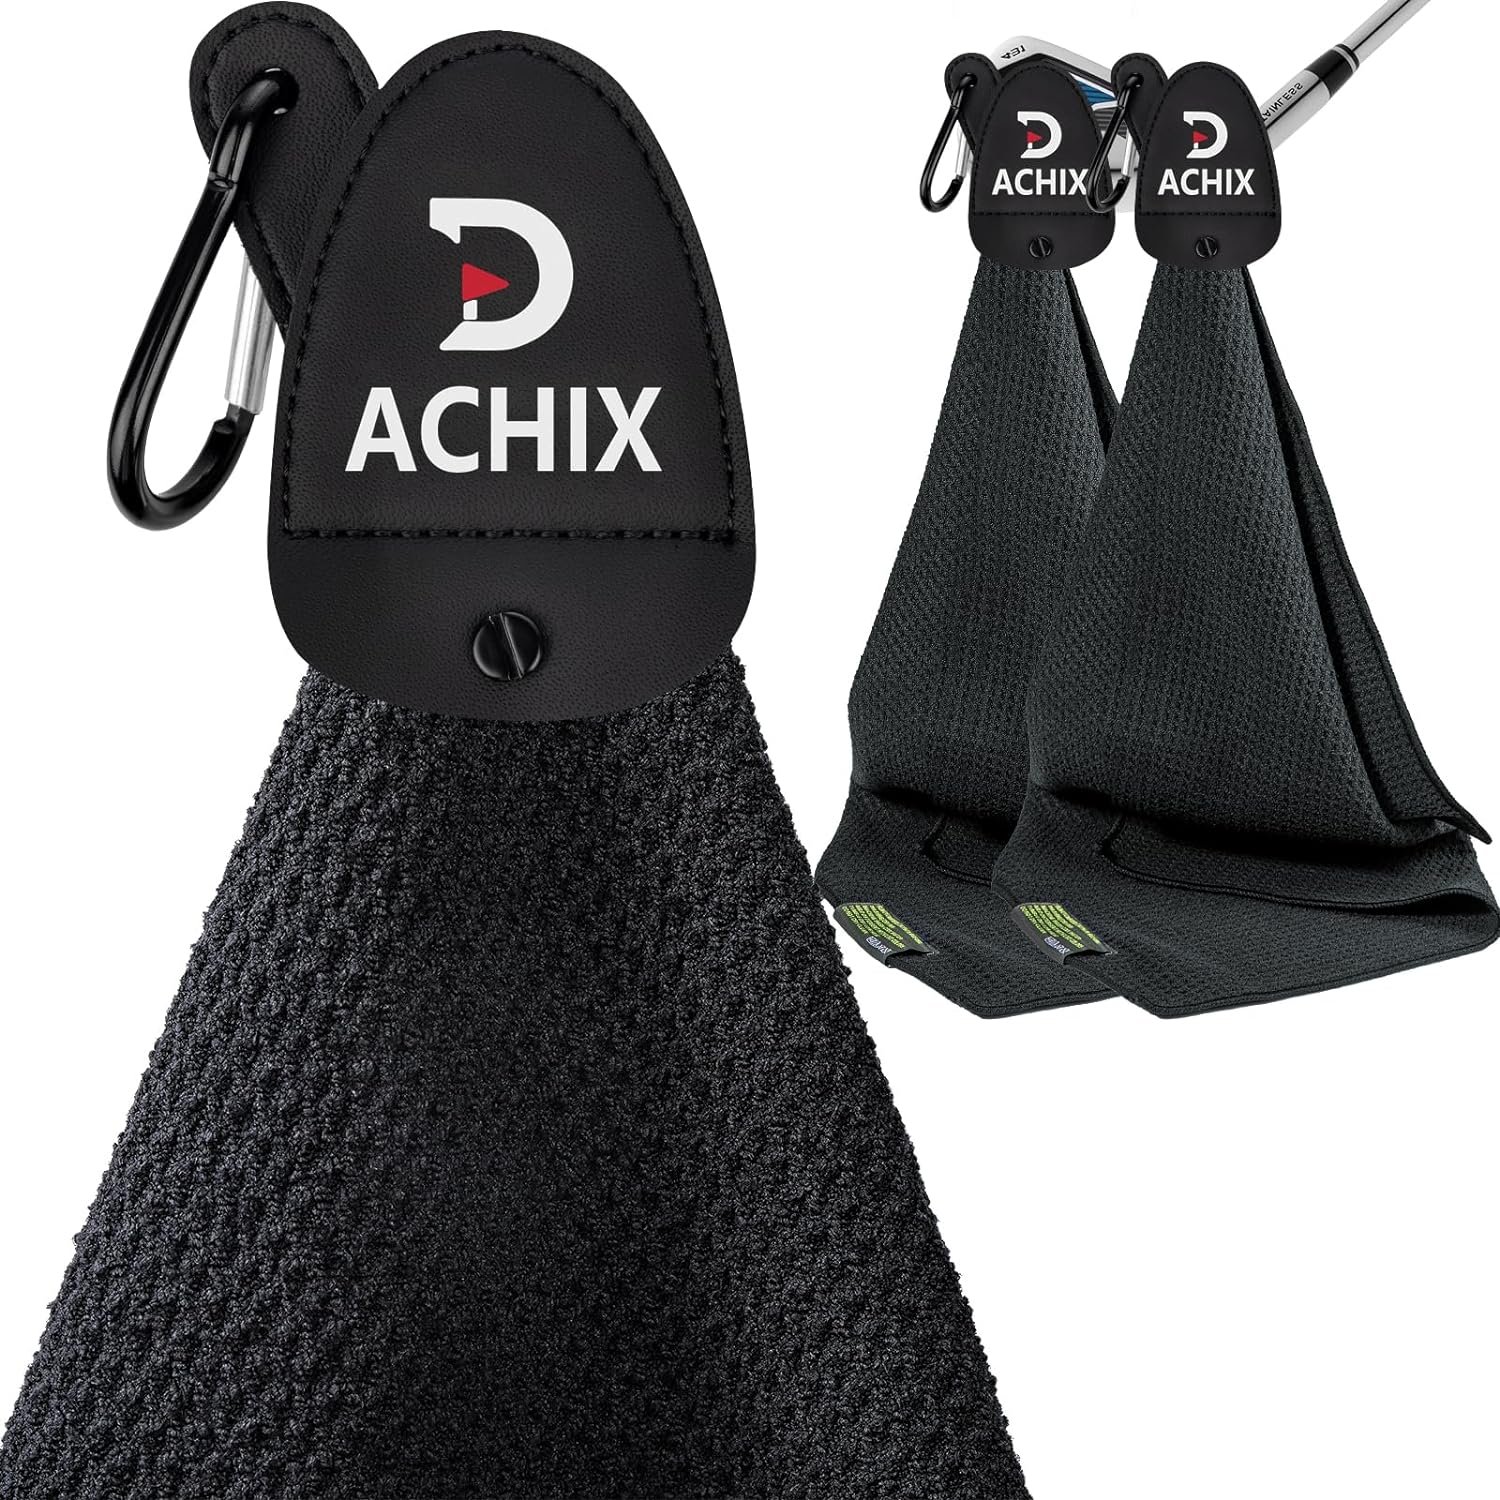 ACHIX 2 Pack Magnetic Golf Towels, Waffle Pattern Golf Towel for Men, Microfiber Golf Towel with Carabiner Clip for Strong Hold to Golf Carts, Clubs and Golf Bags (Black)